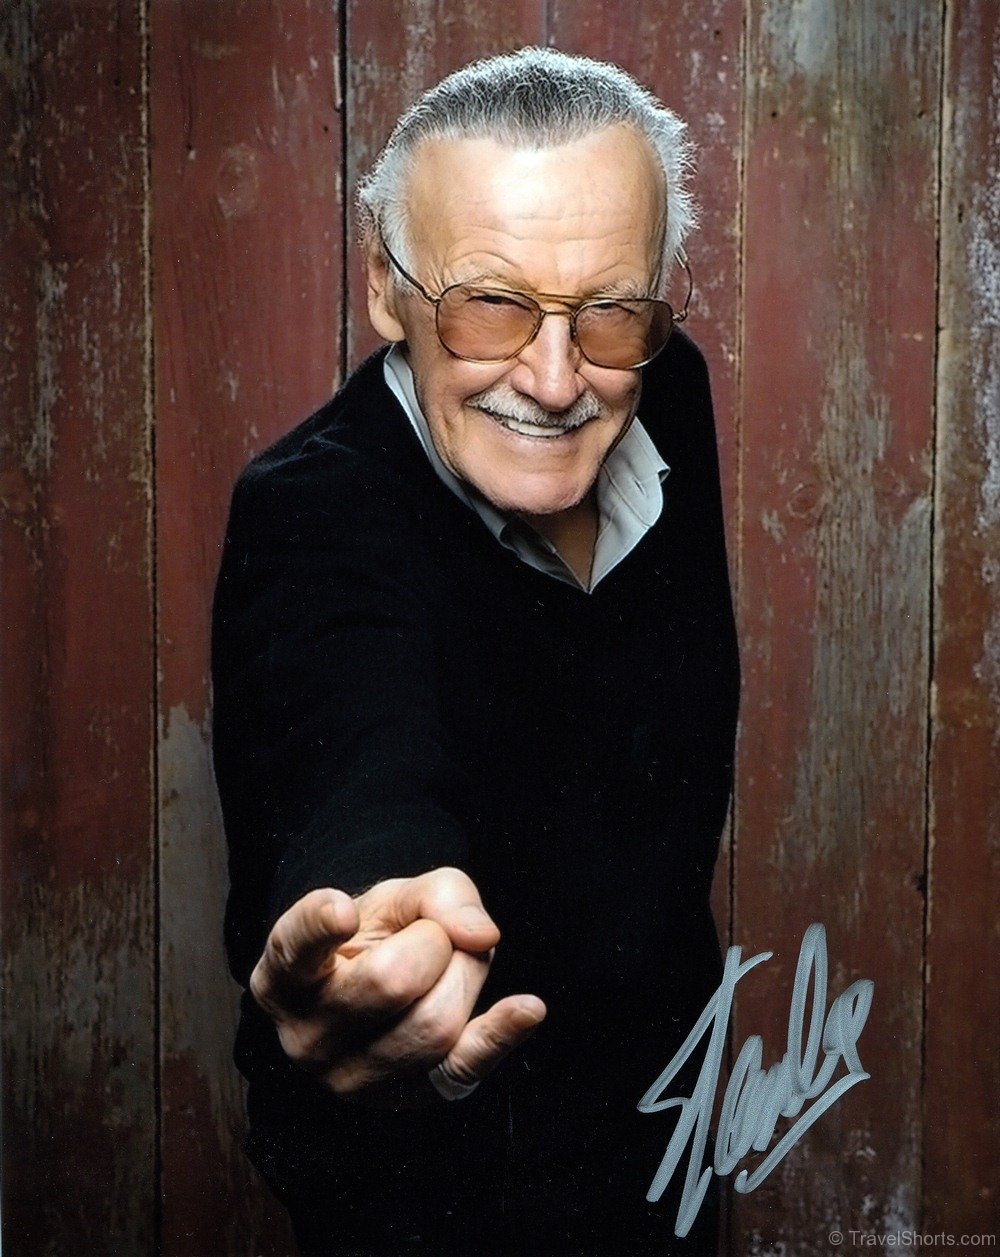 Stan Lee Signed Photograph